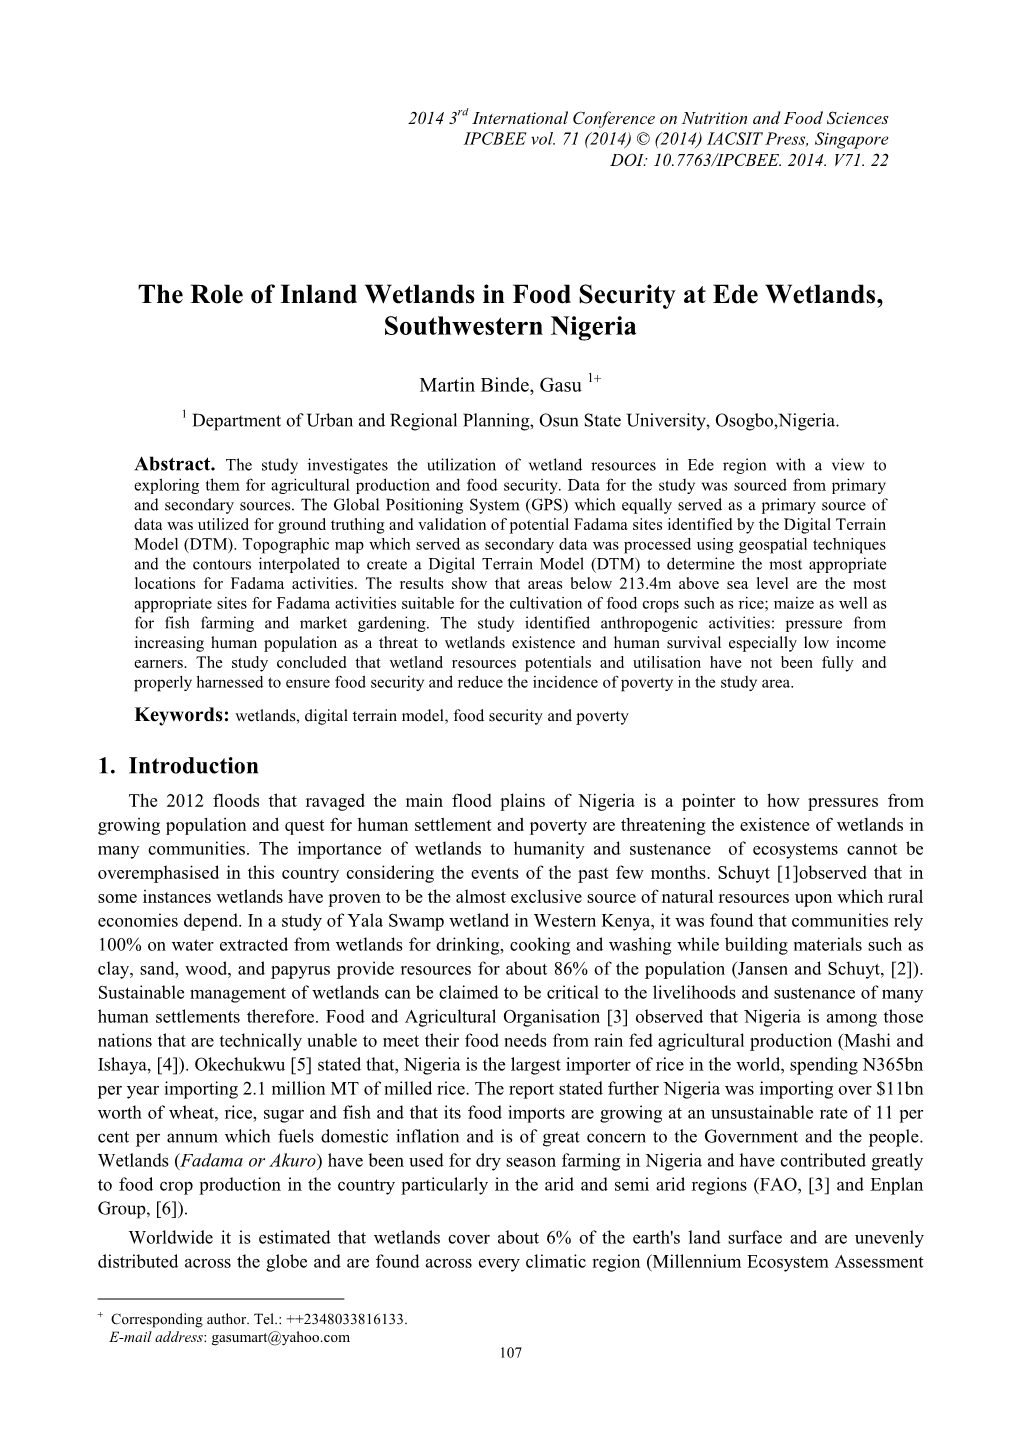 The Role of Inland Wetlands in Food Security at Ede Wetlands, Southwestern Nigeria